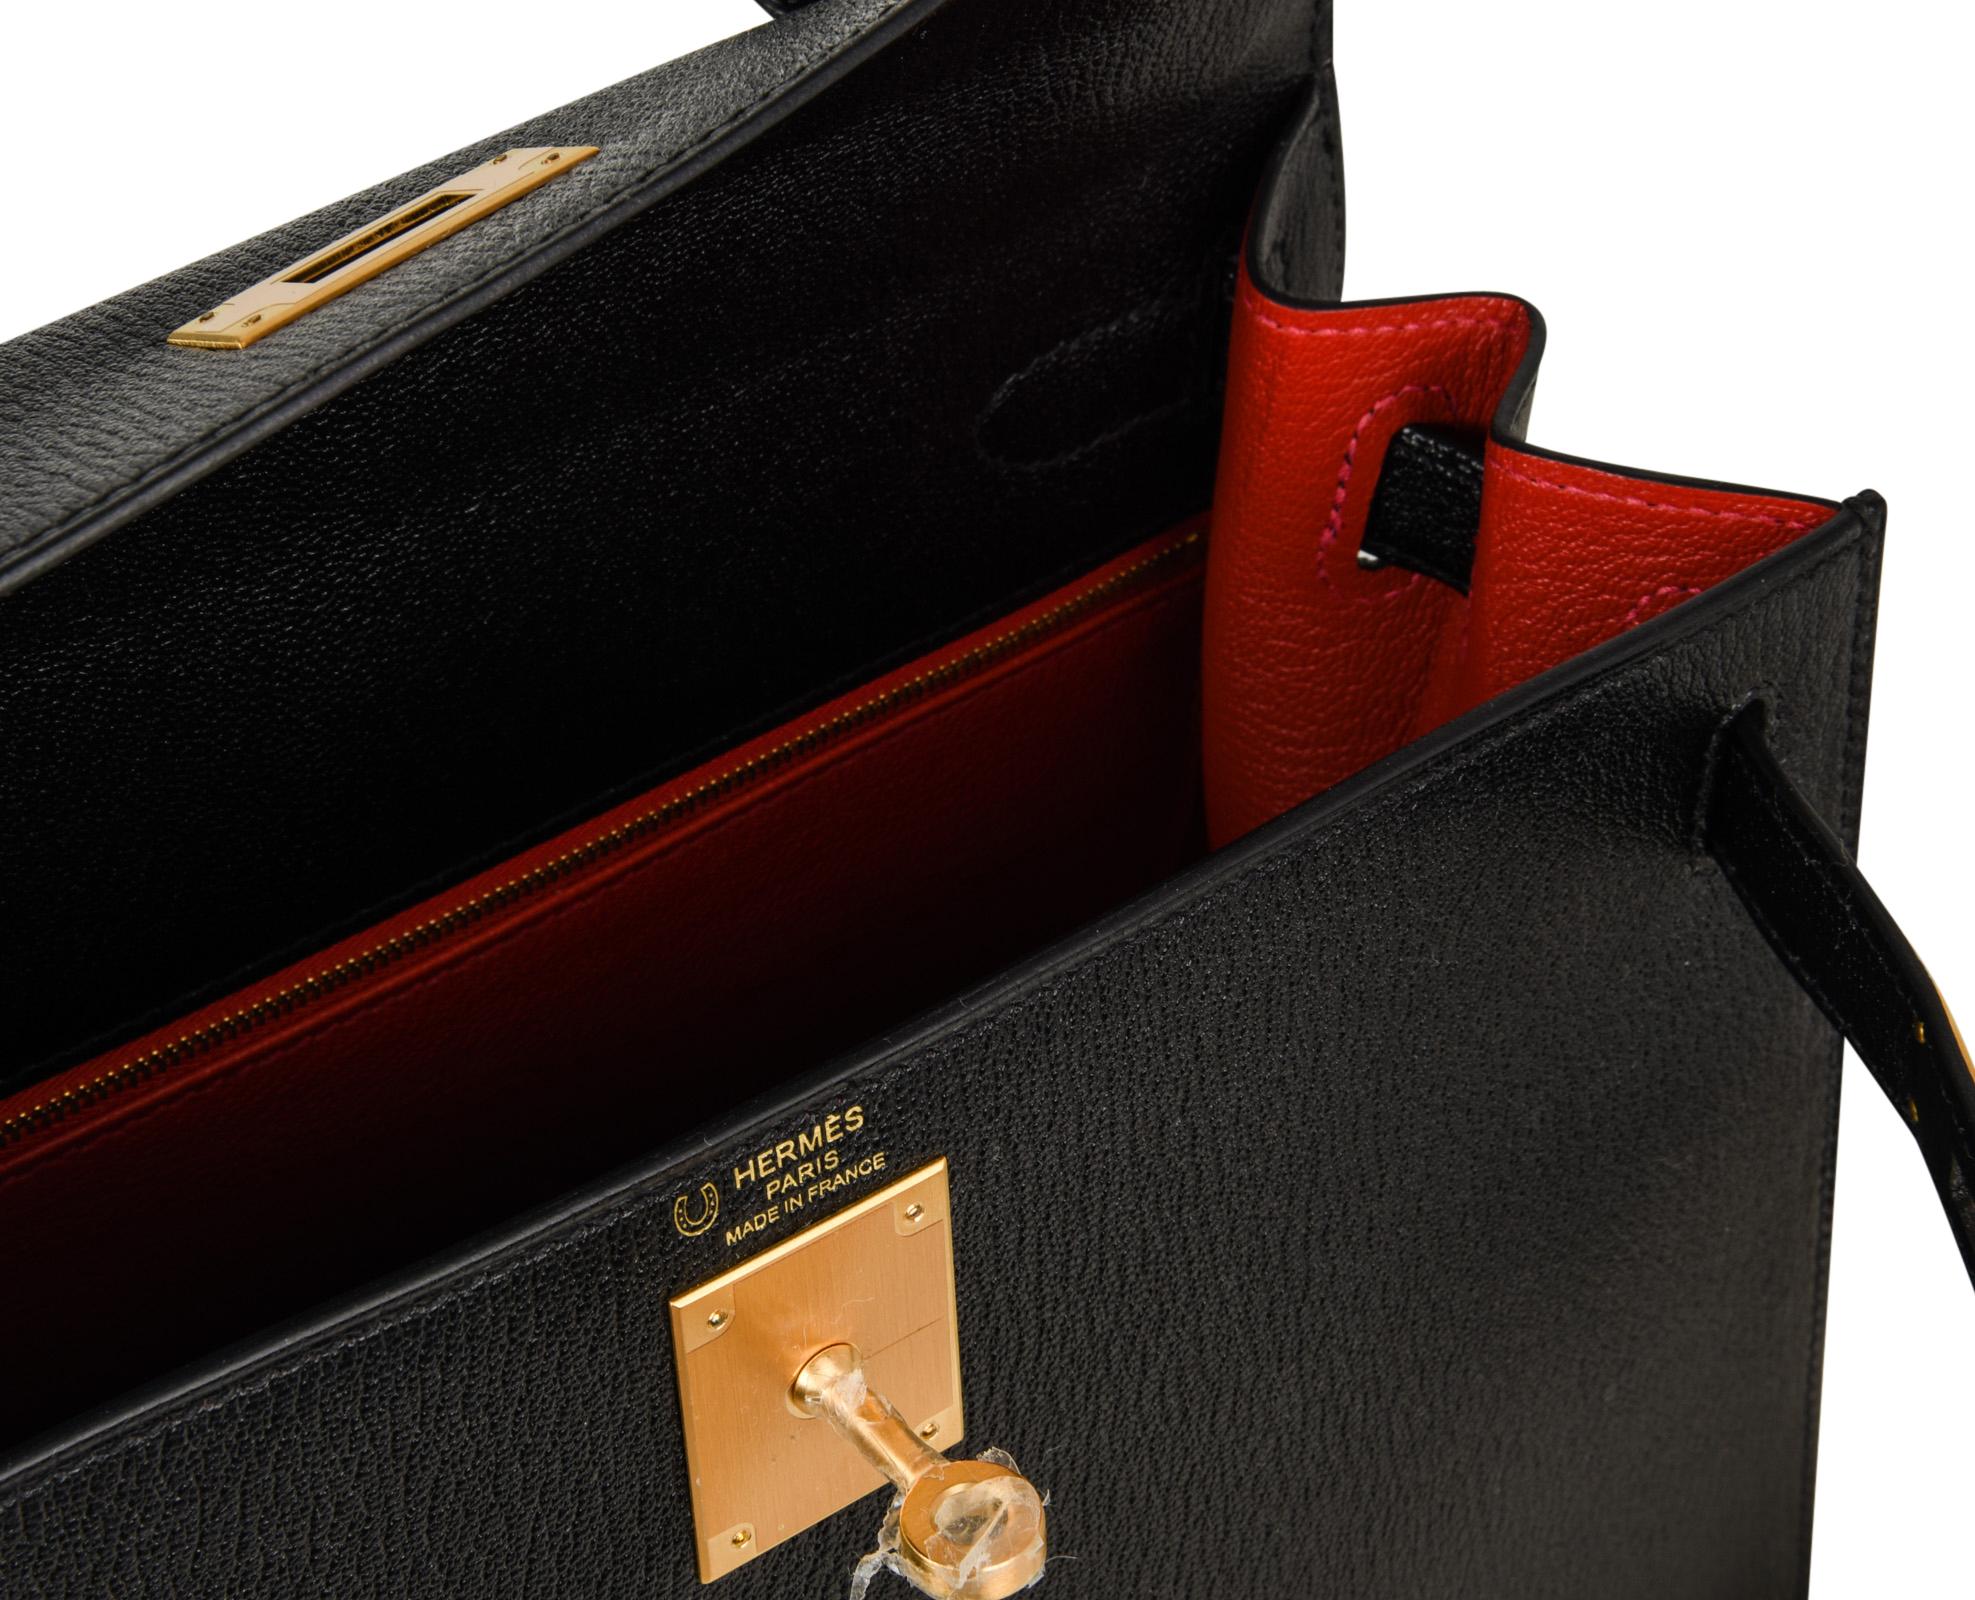 Guaranteed authentic rare chevre leather HSS Hermes Kelly 28 sellier bag with brushed gold hardware.
Black with Vermillion red  interior brings drama.
Exquisite handbag.
Comes with lock, keys, strap, clochette, sleepers, raincoat and signature